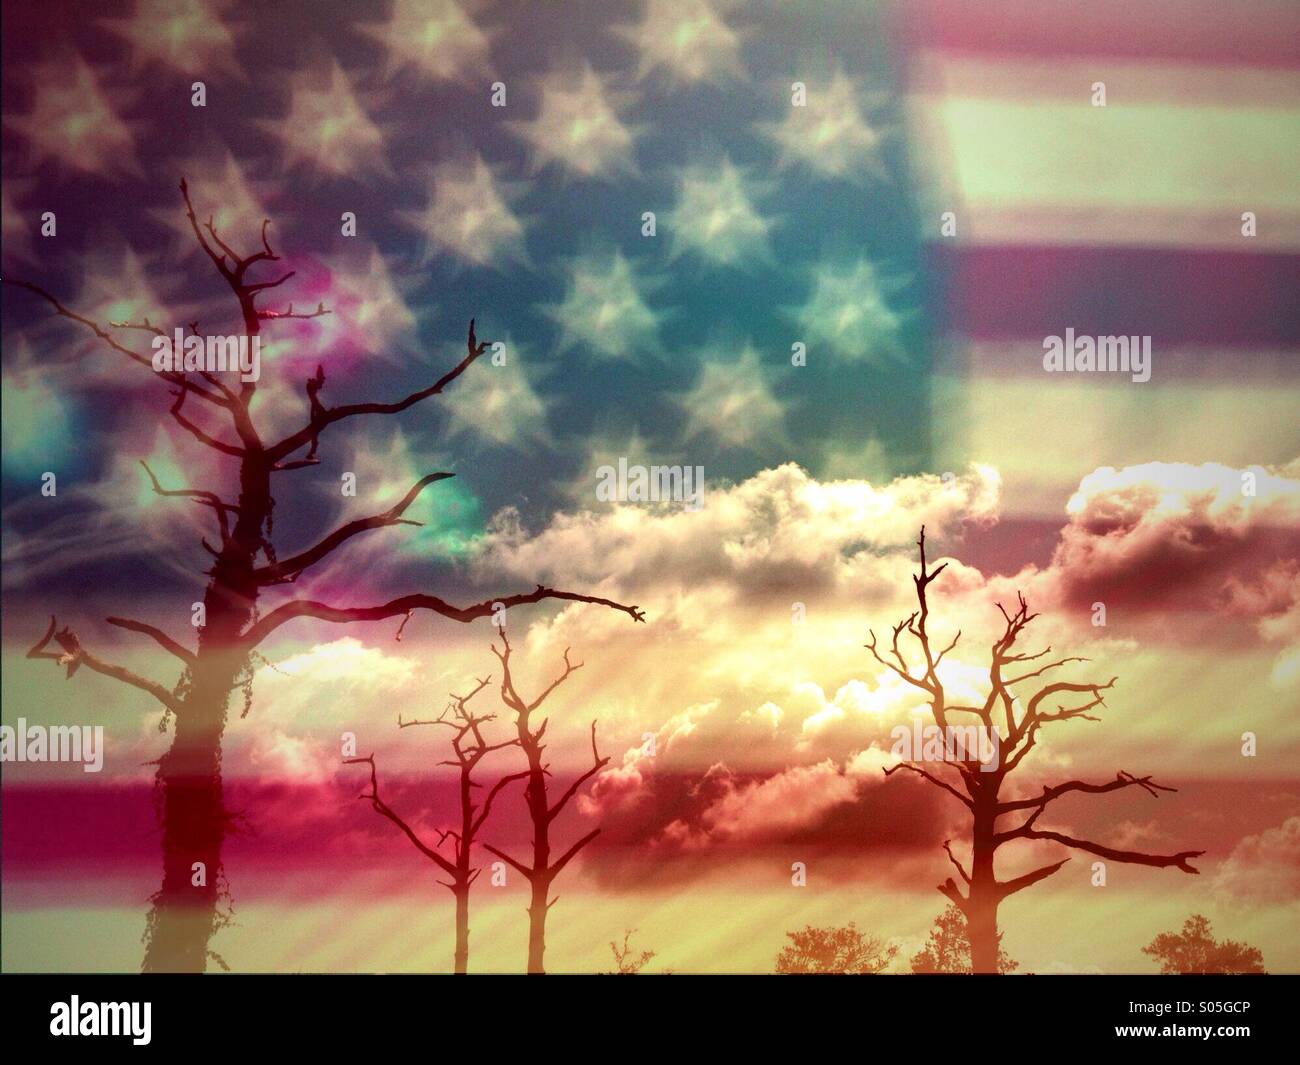 Double_exposure_of_an_American_flag_with